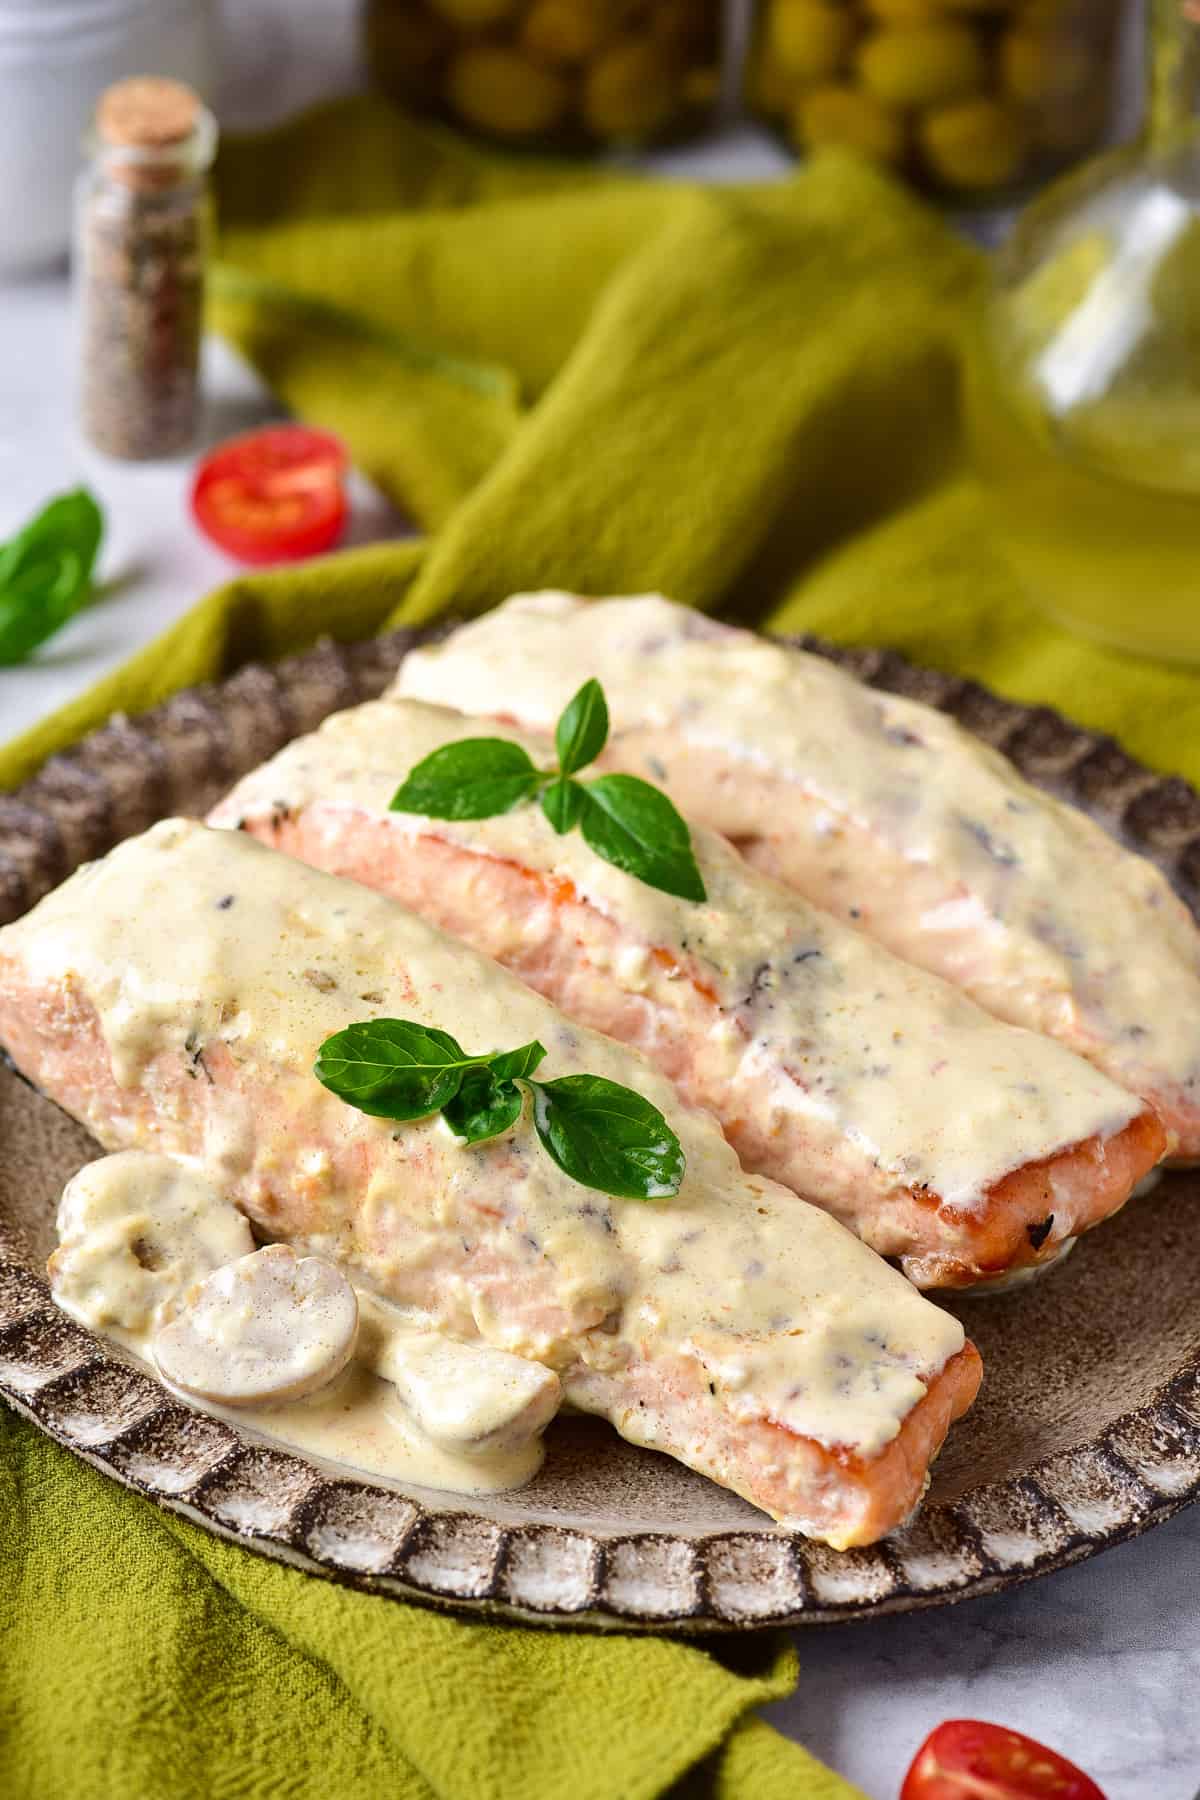 Plate with pan fried salmon covered in creamy mushroom sauce.